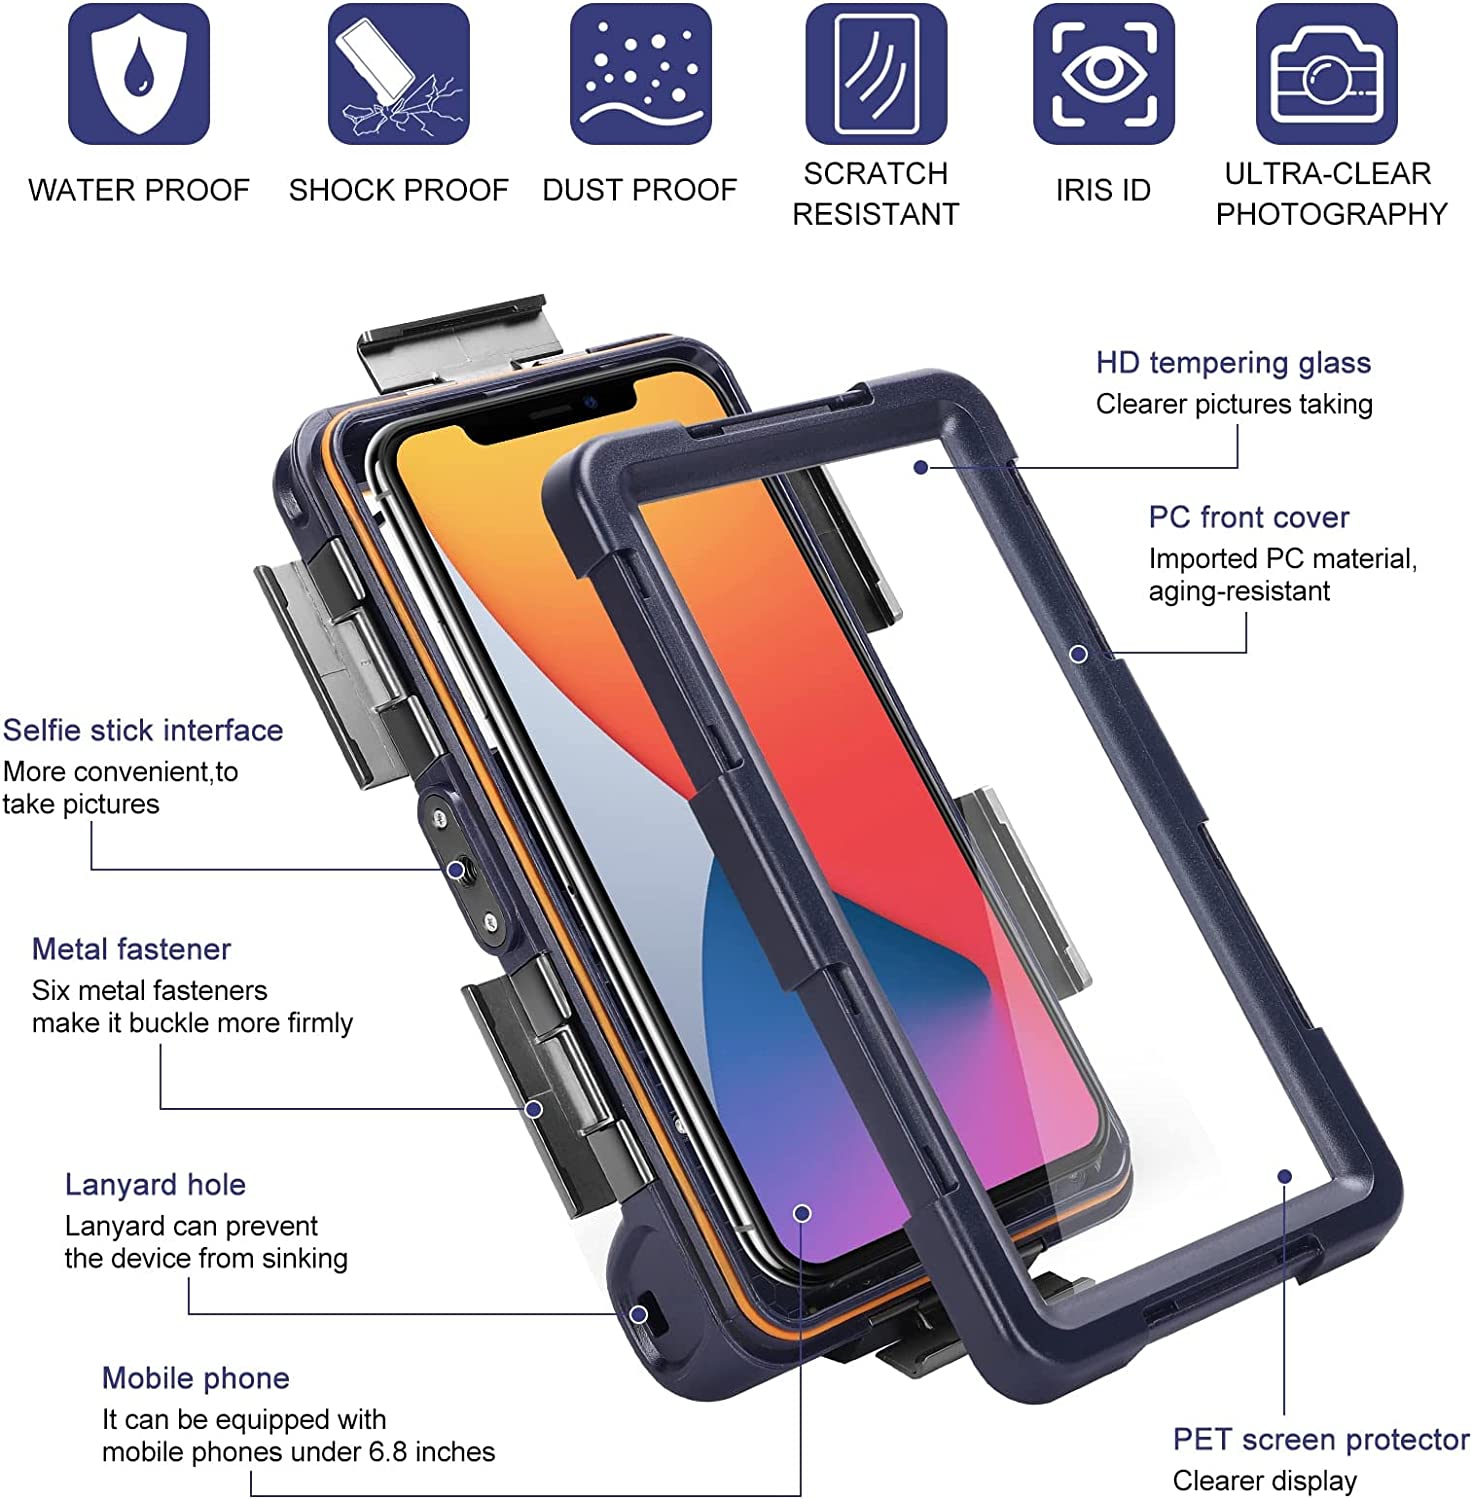 Protective Cases. USA Made and Waterproof.